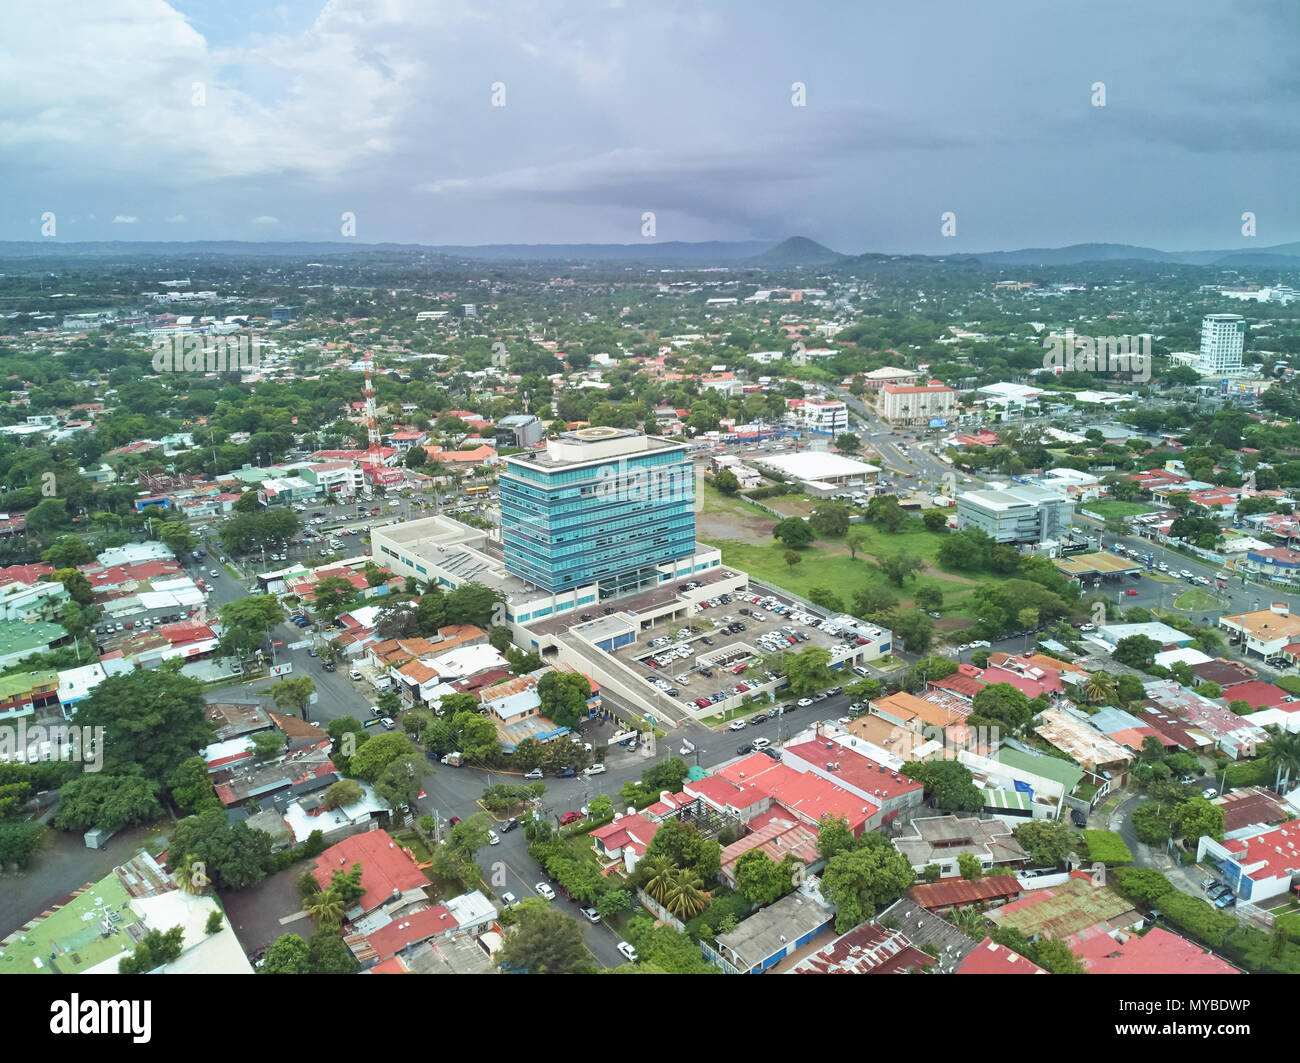 Managua city landscape on day aerial drone view Stock Photo